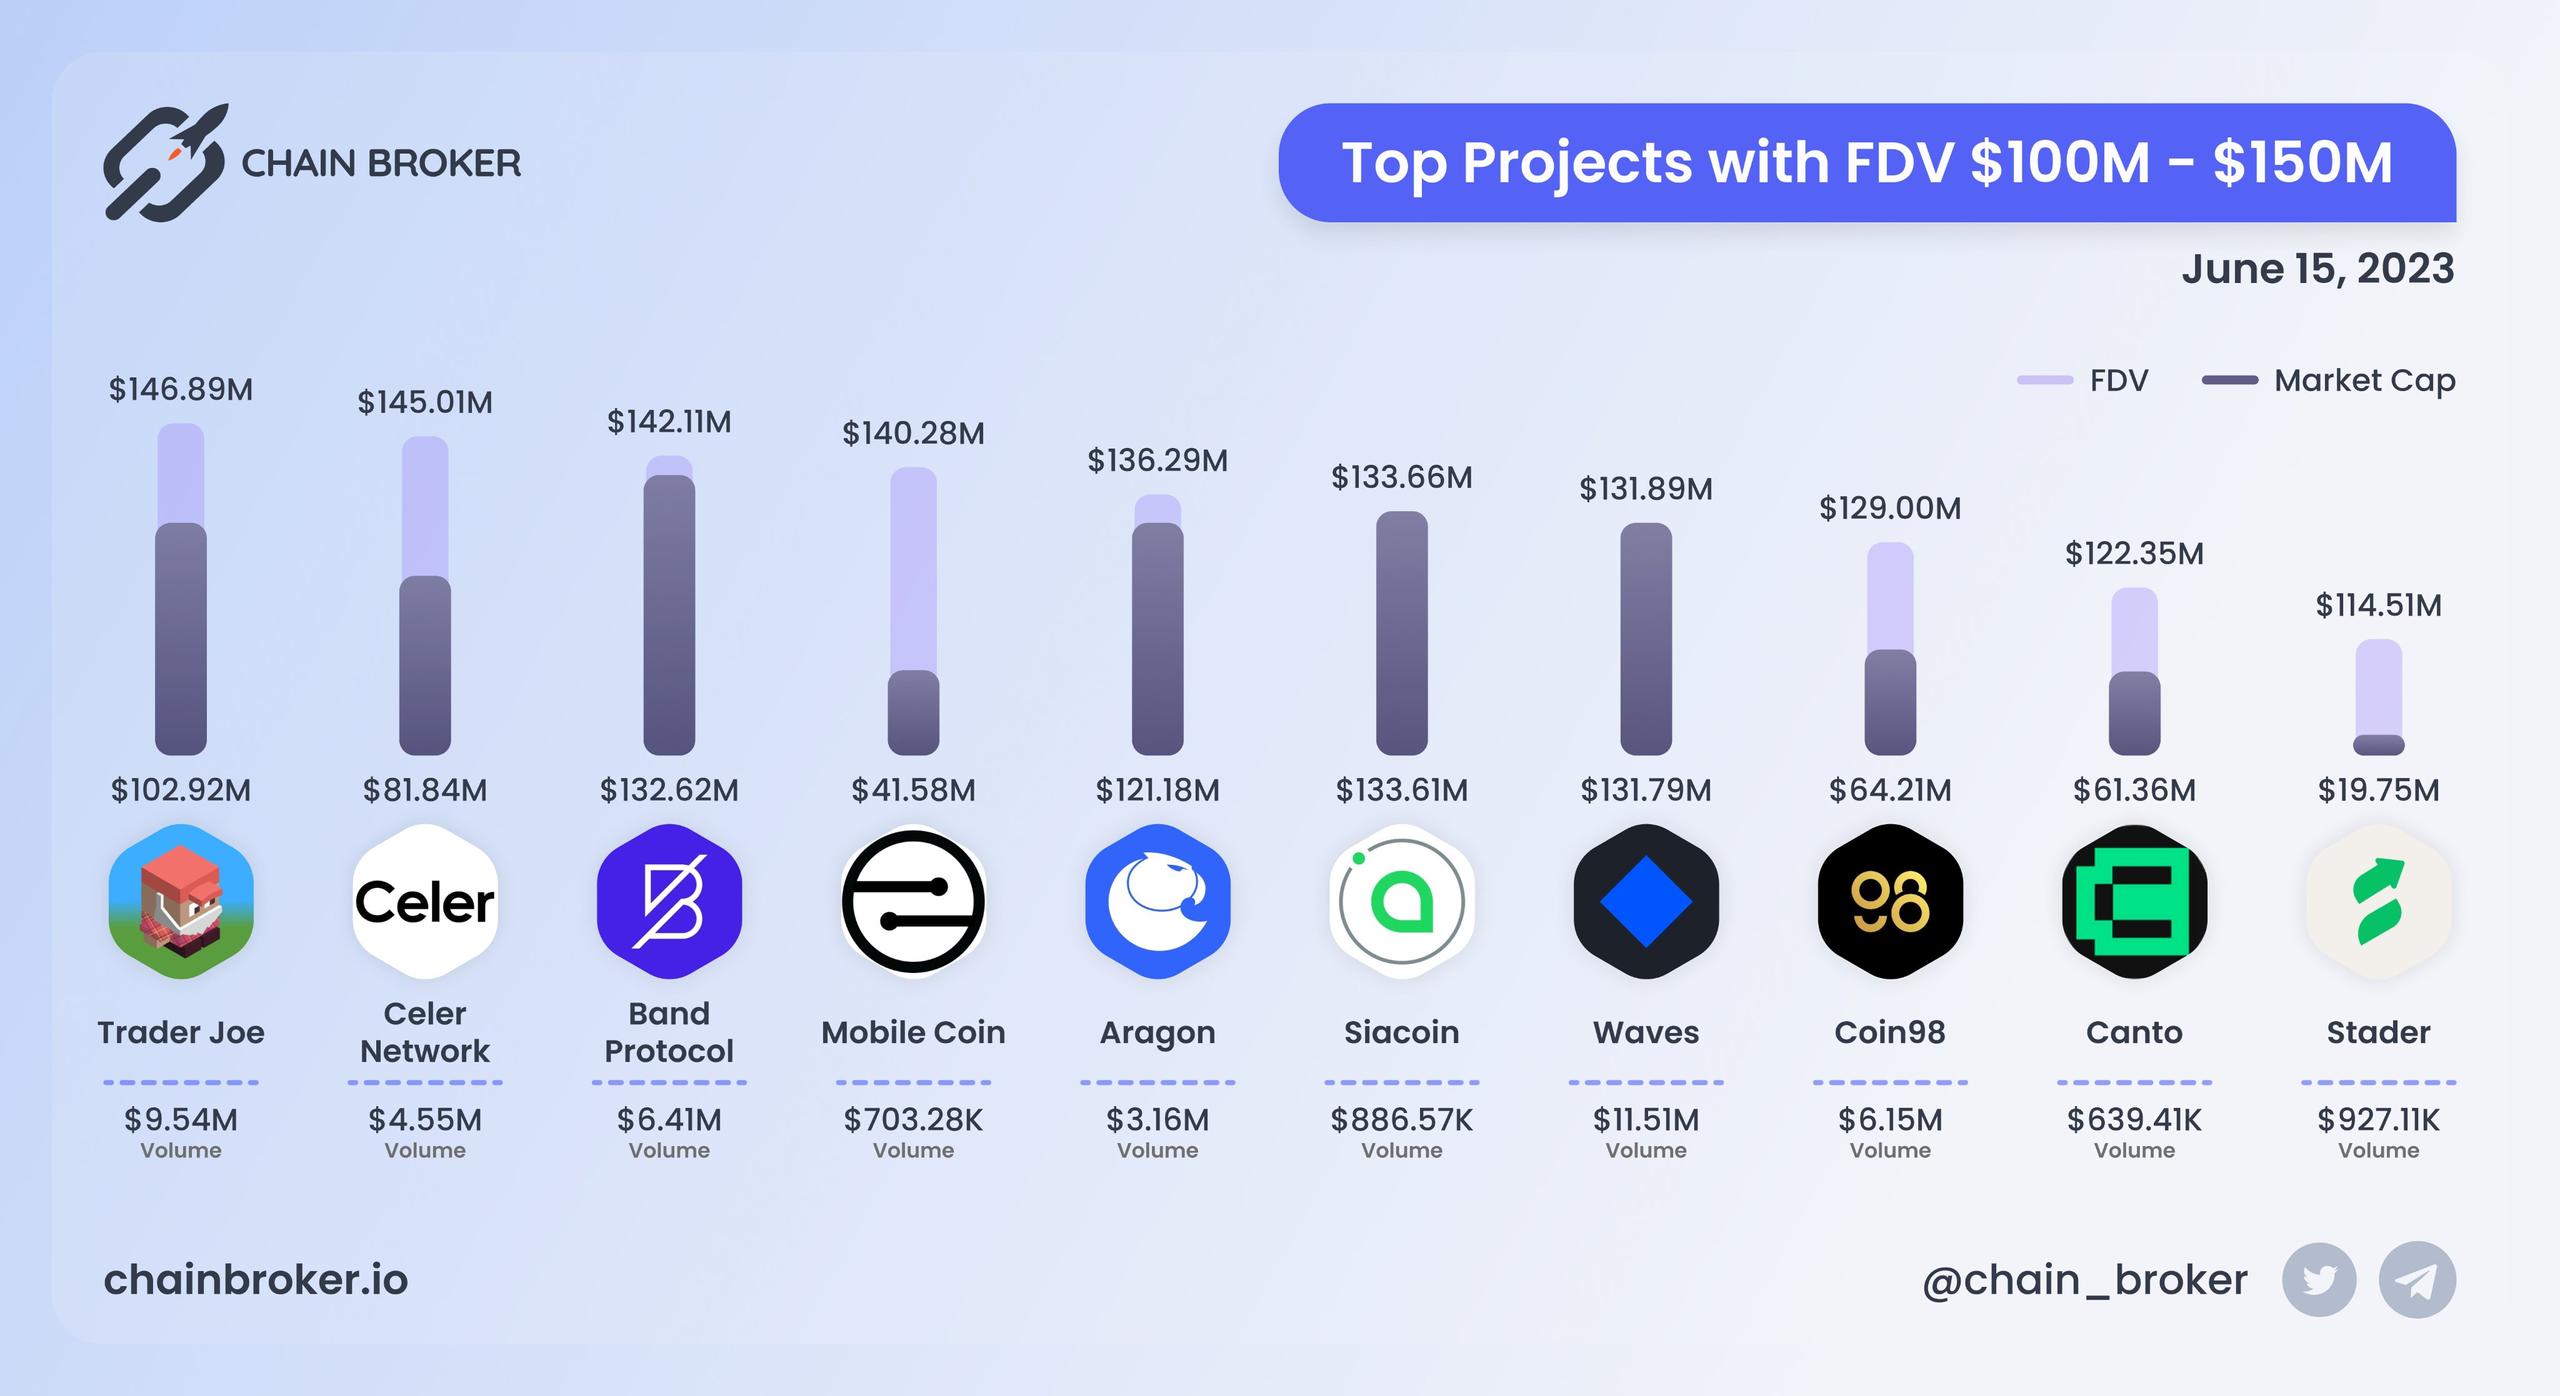 Top projects with FDV $100M - $150M